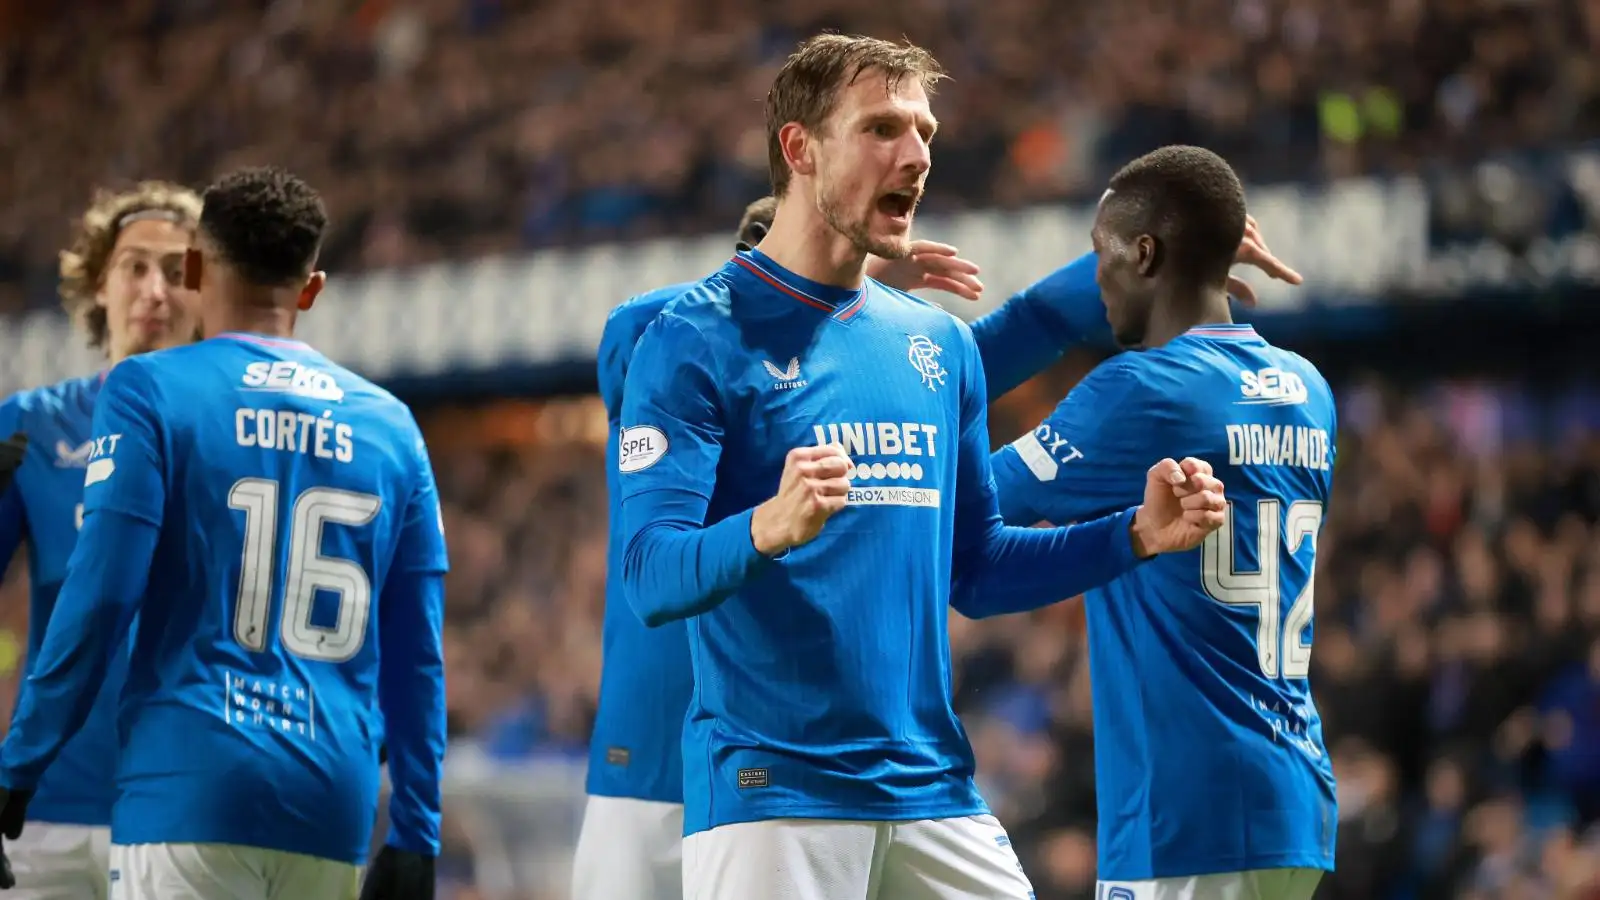 Rangers star who loves the club is destined to leave; wants big finish to his time in Glasgow